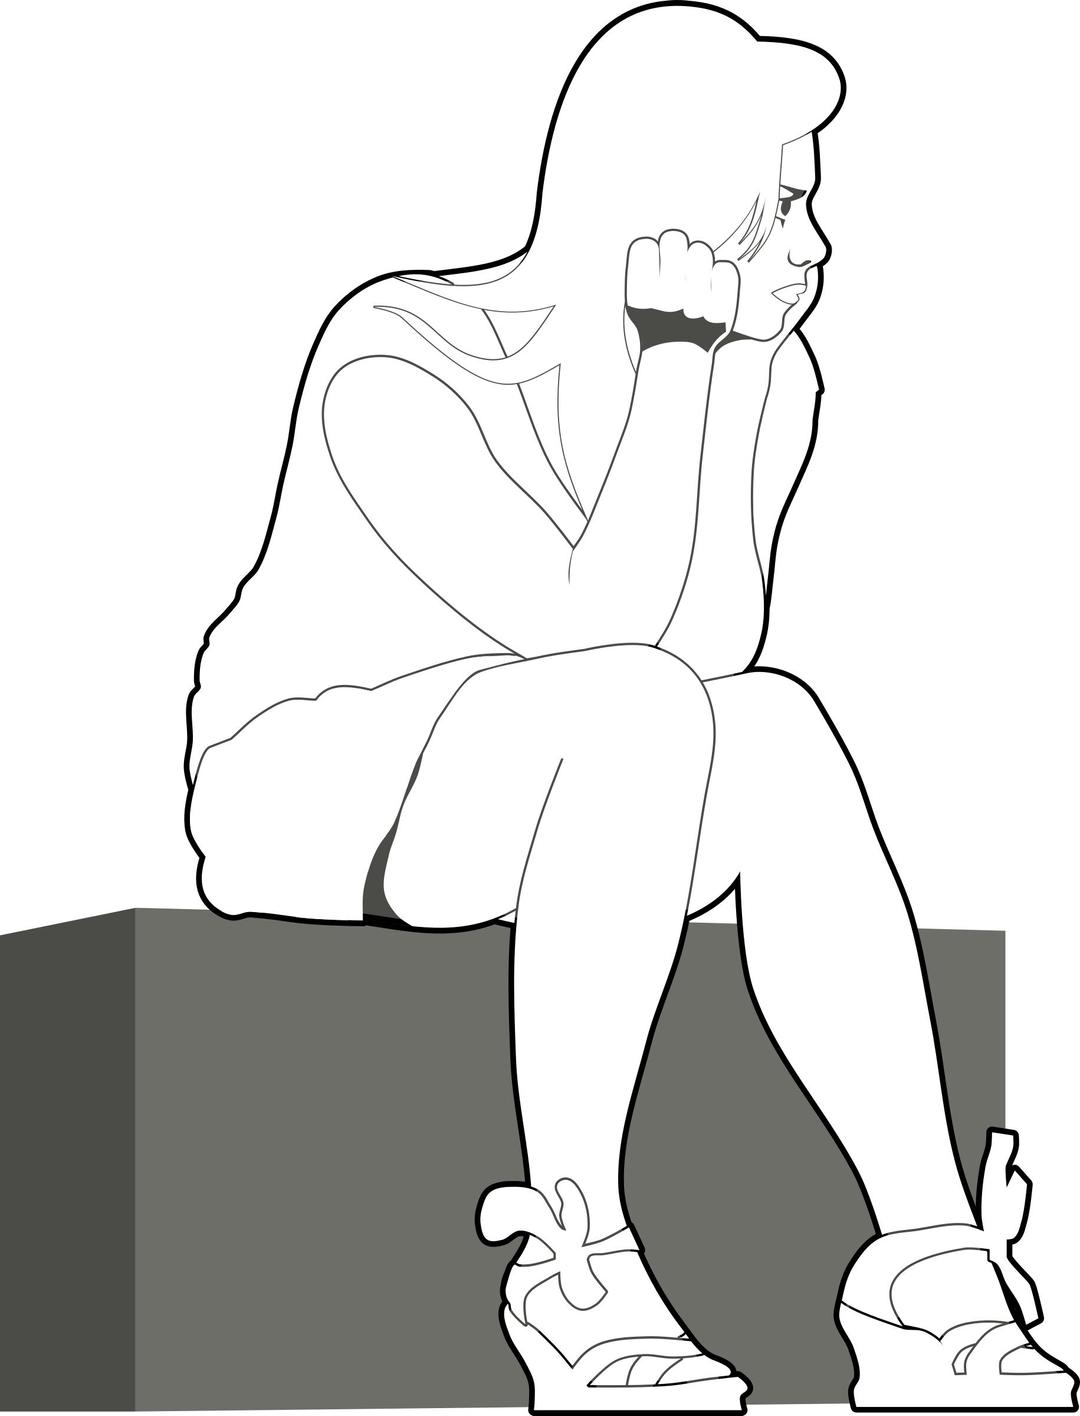 Waiting girl O by Rones png transparent